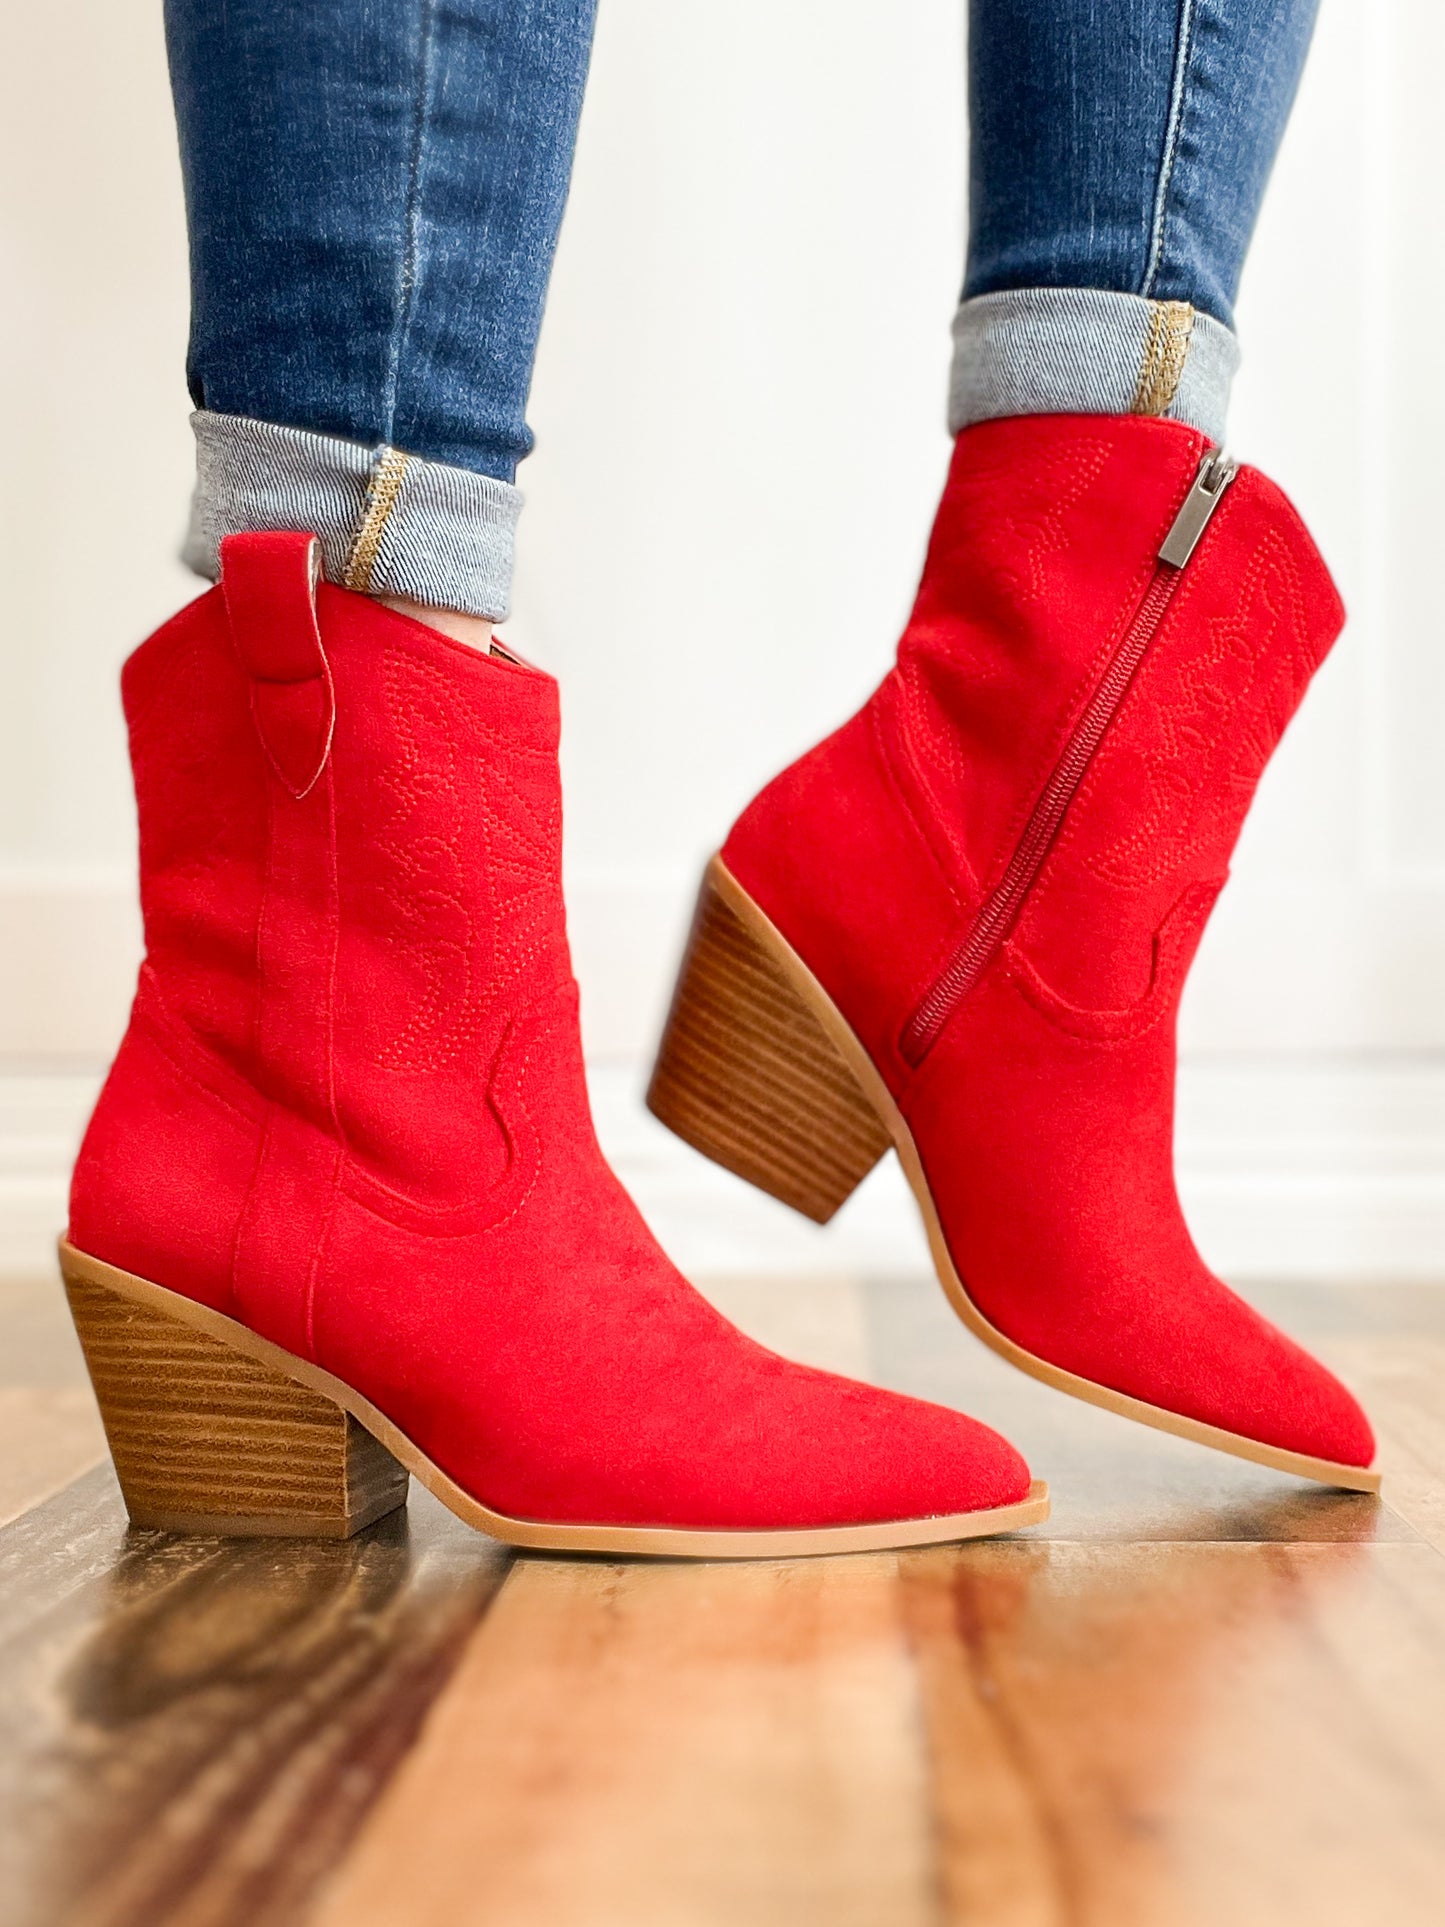 Corkys Rowdy Booties in Red Suede * FINAL SALE